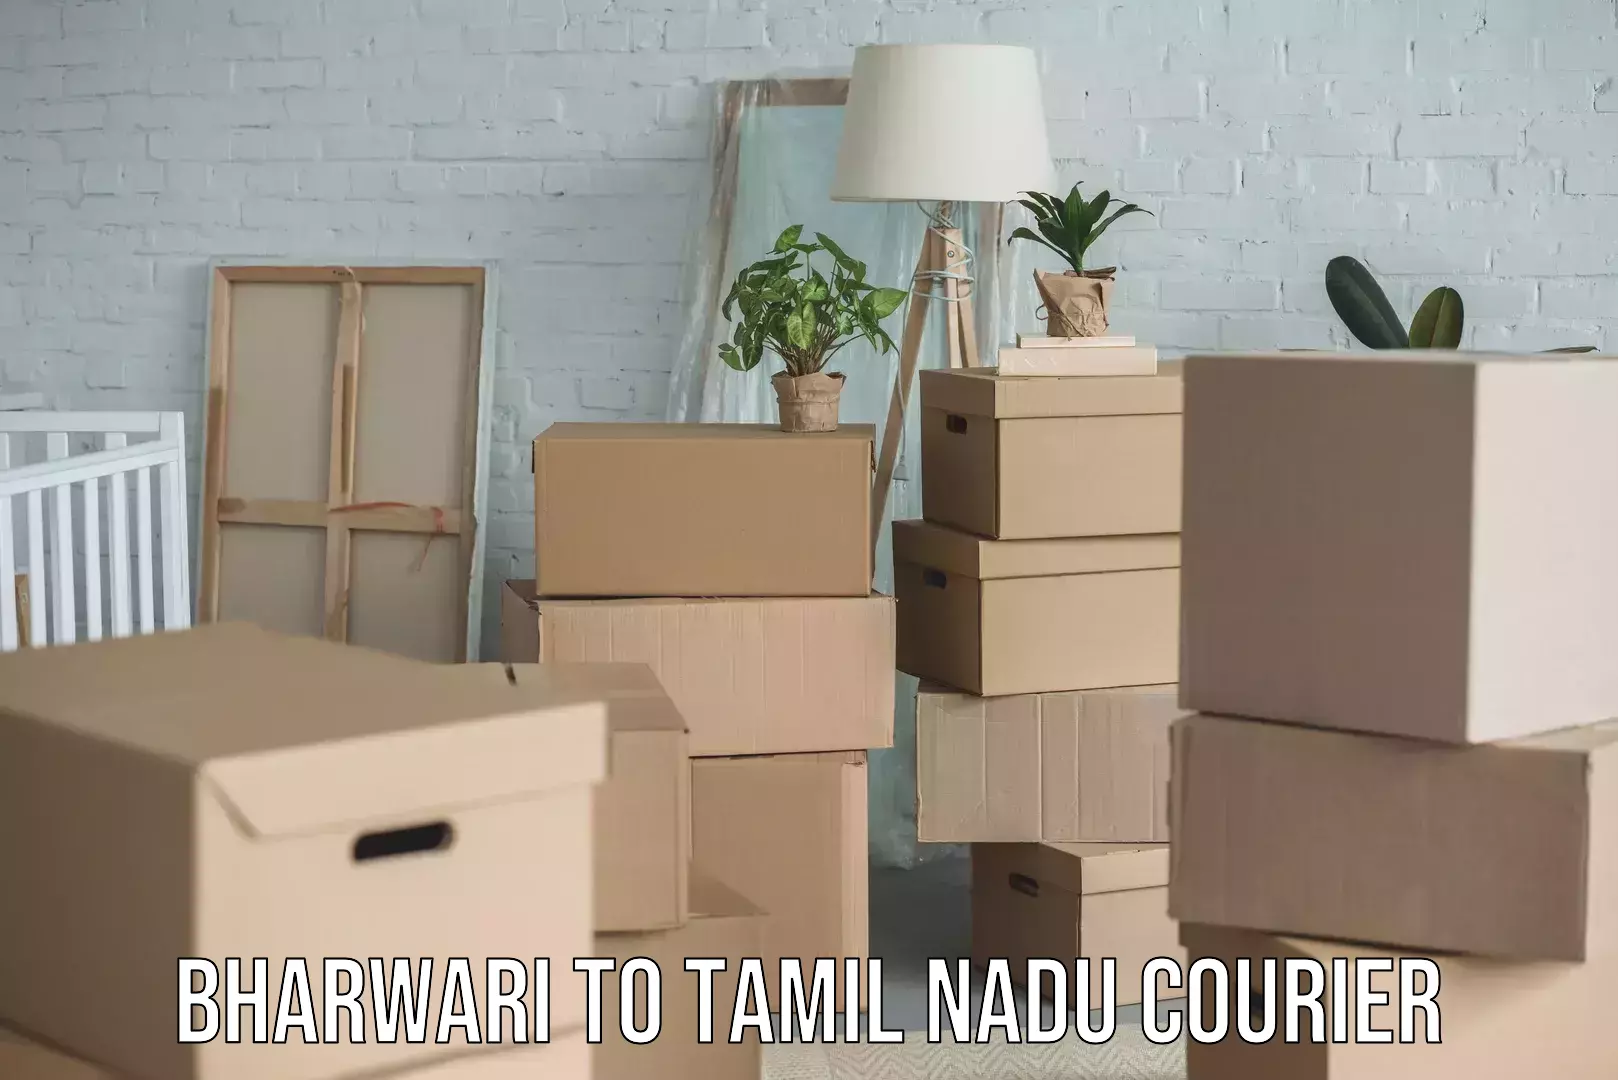 State-of-the-art courier technology Bharwari to Tamil Nadu